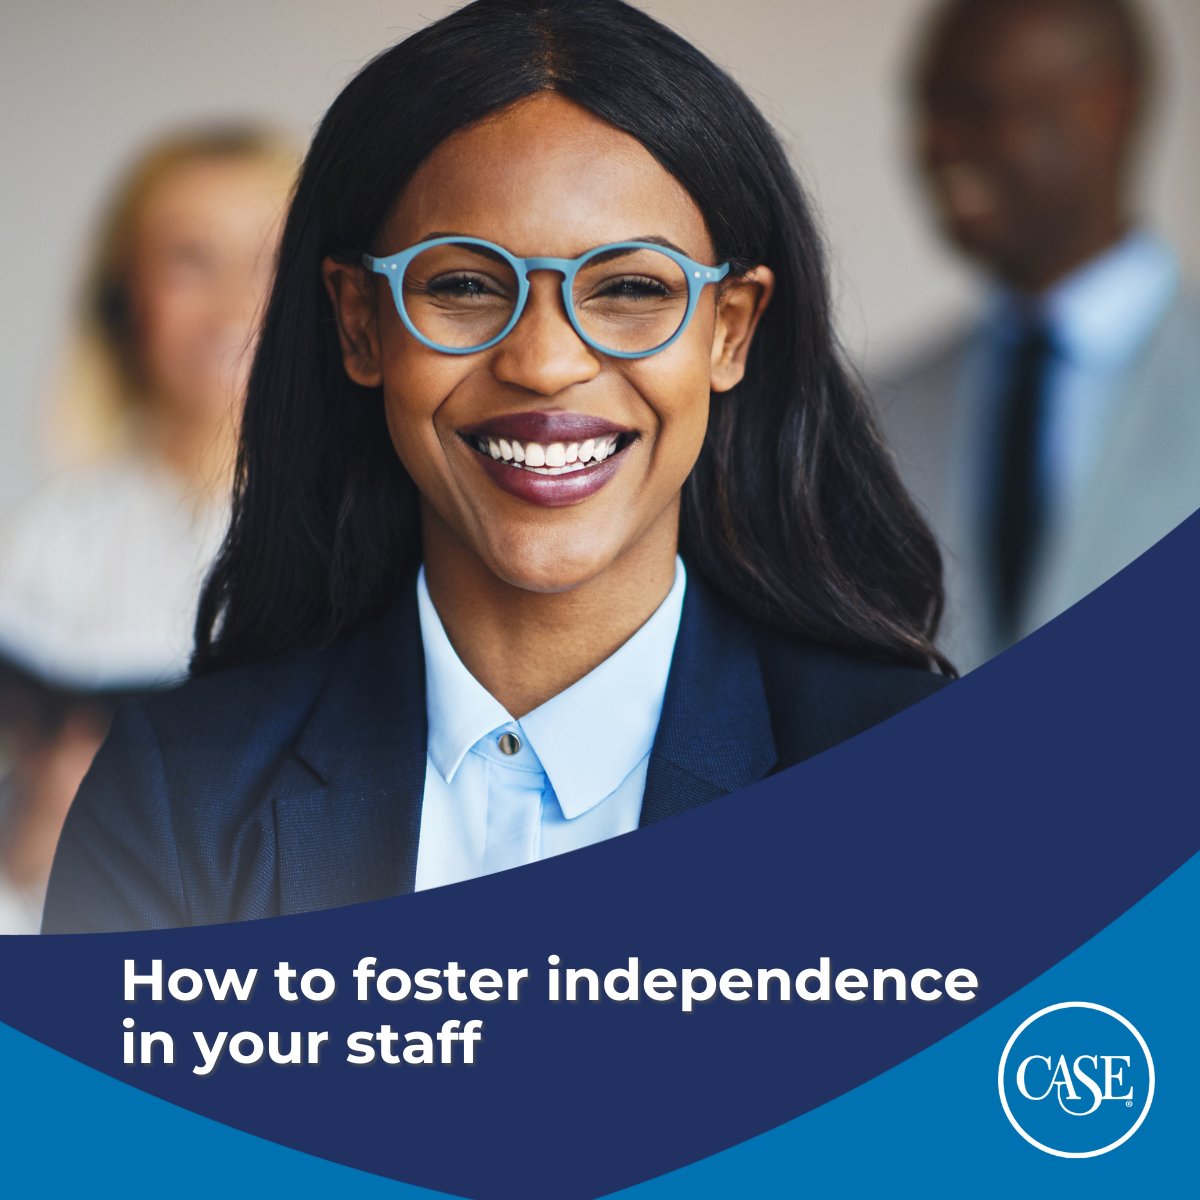 At CASE we believe that independence is more than just a skill—it's a key ingredient for success! Independent employees take charge, make decisions, and seize opportunities. Here are five strategies to nurture independence on your team: hubs.ly/Q029L0DM0